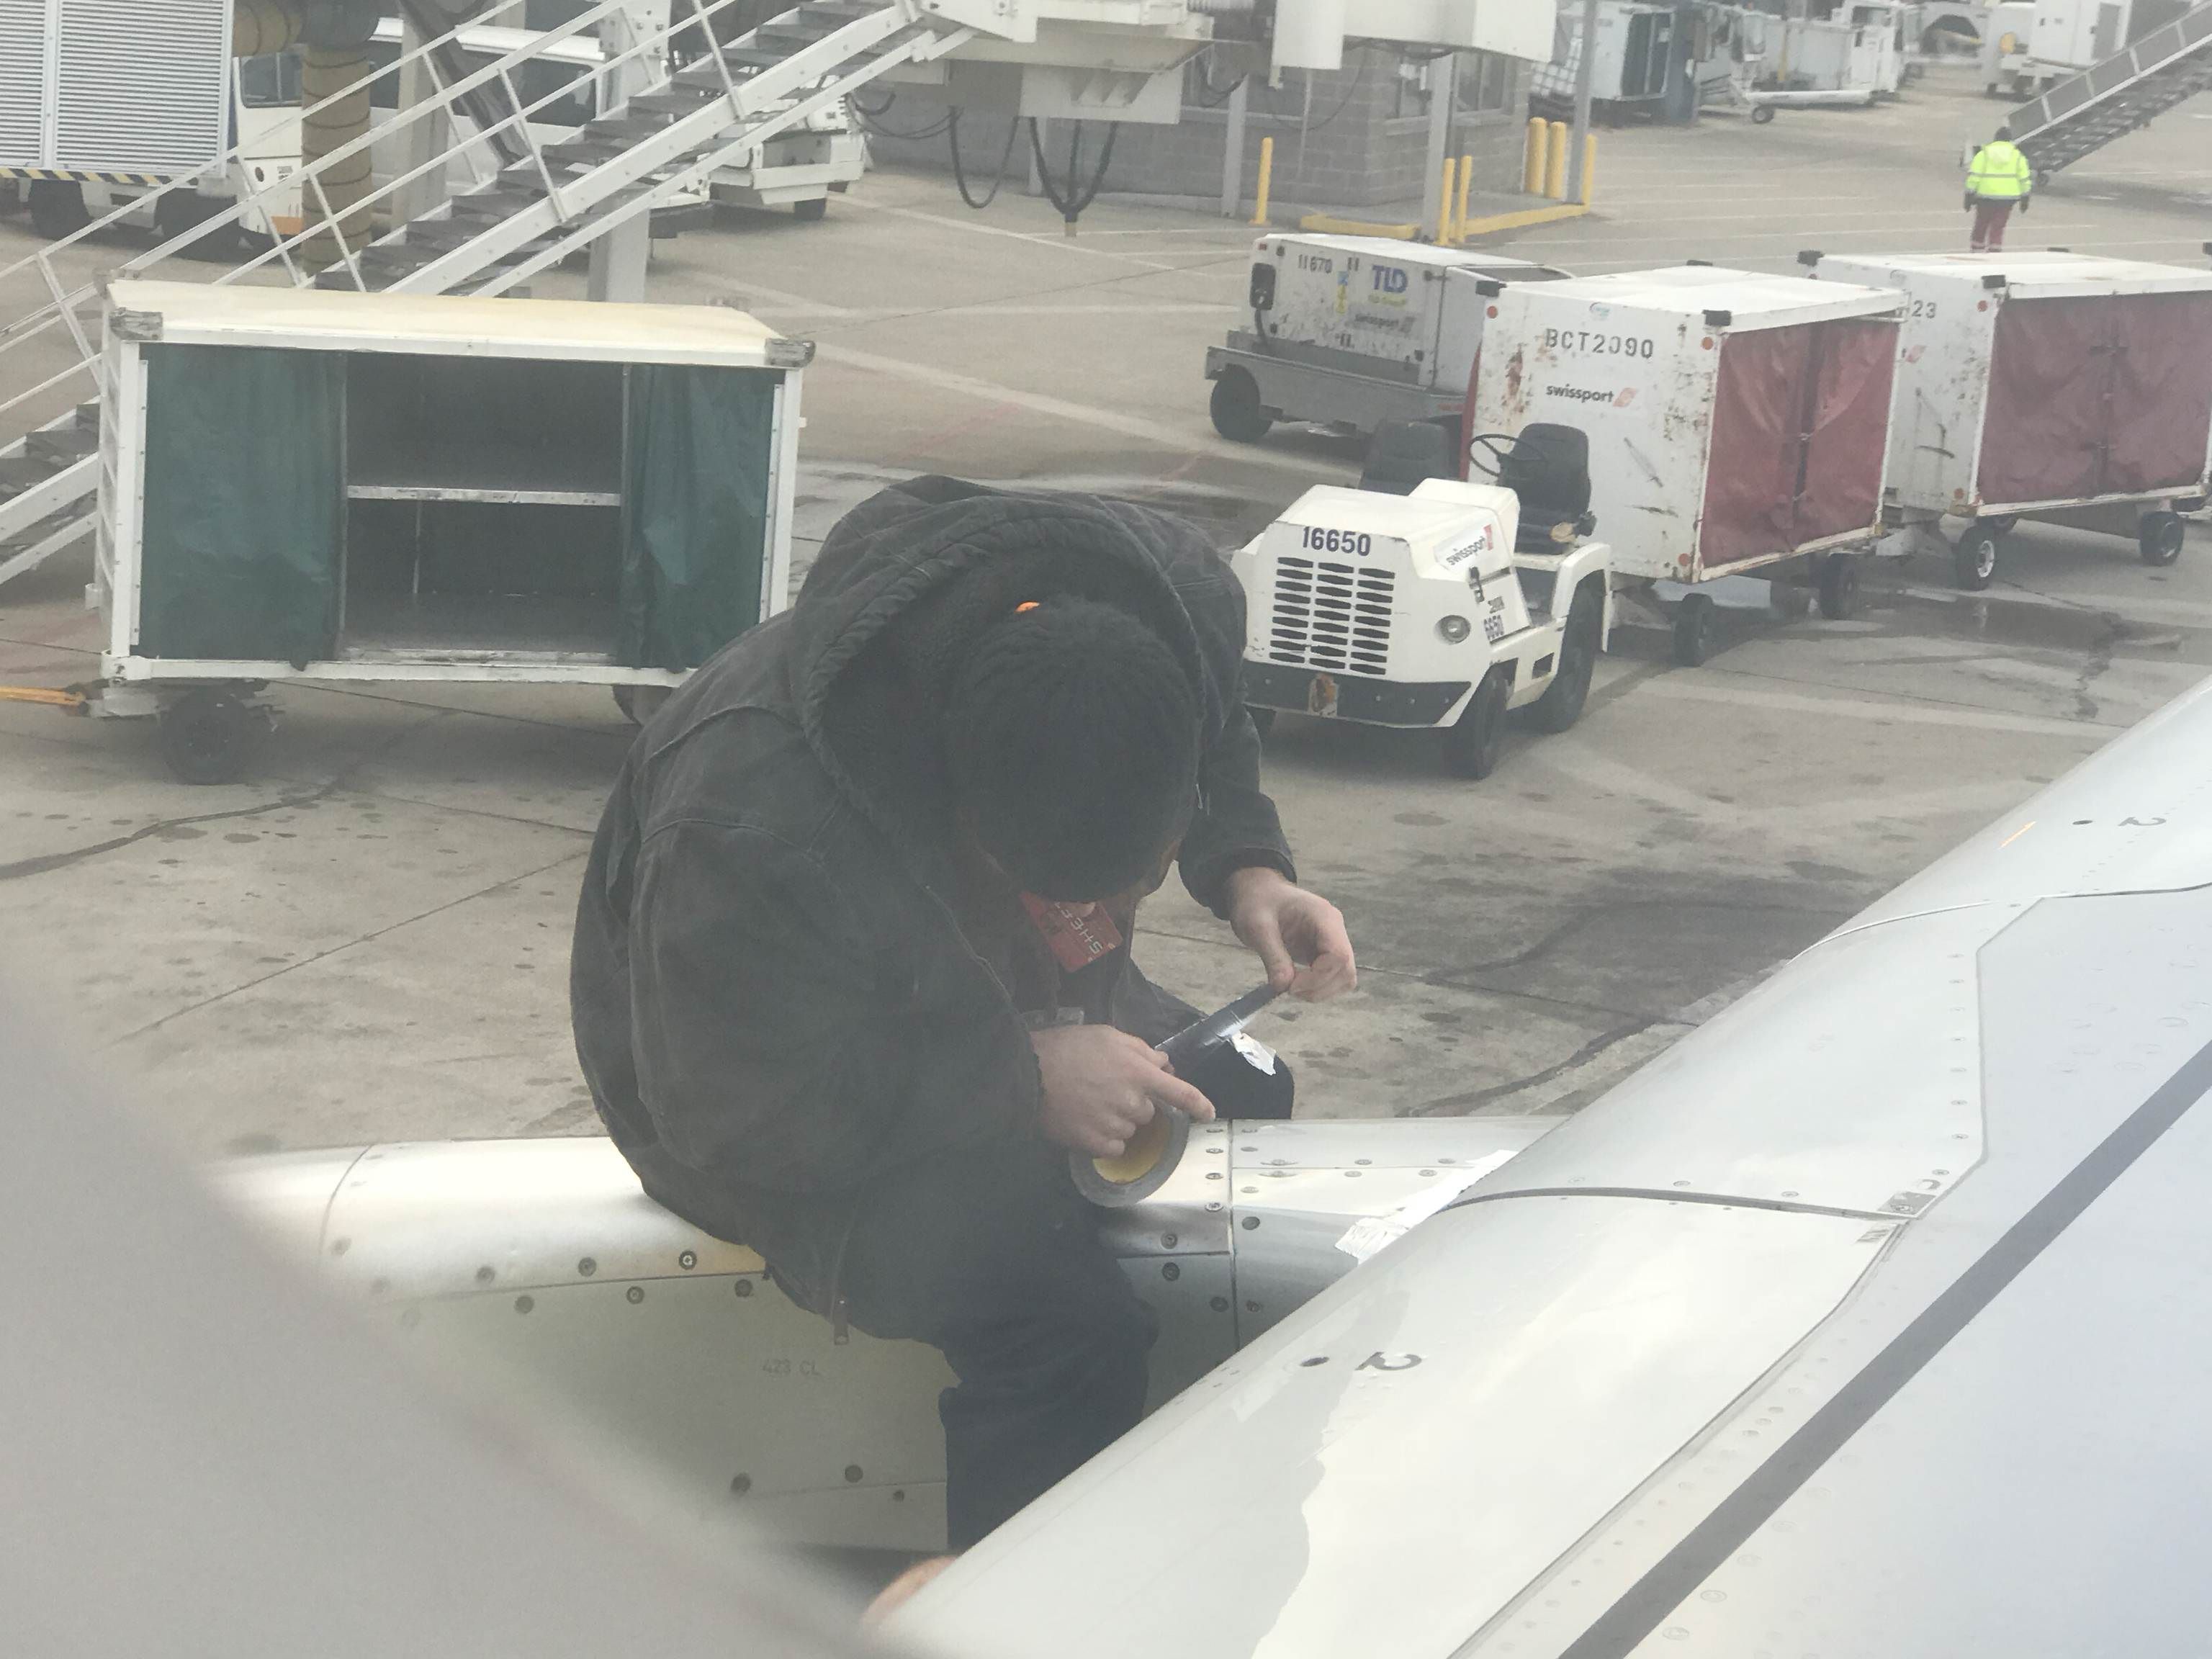 So our Spirit flight got delayed due some malfunction. Then I saw some guy duct taping our engine to a wing. WTF?